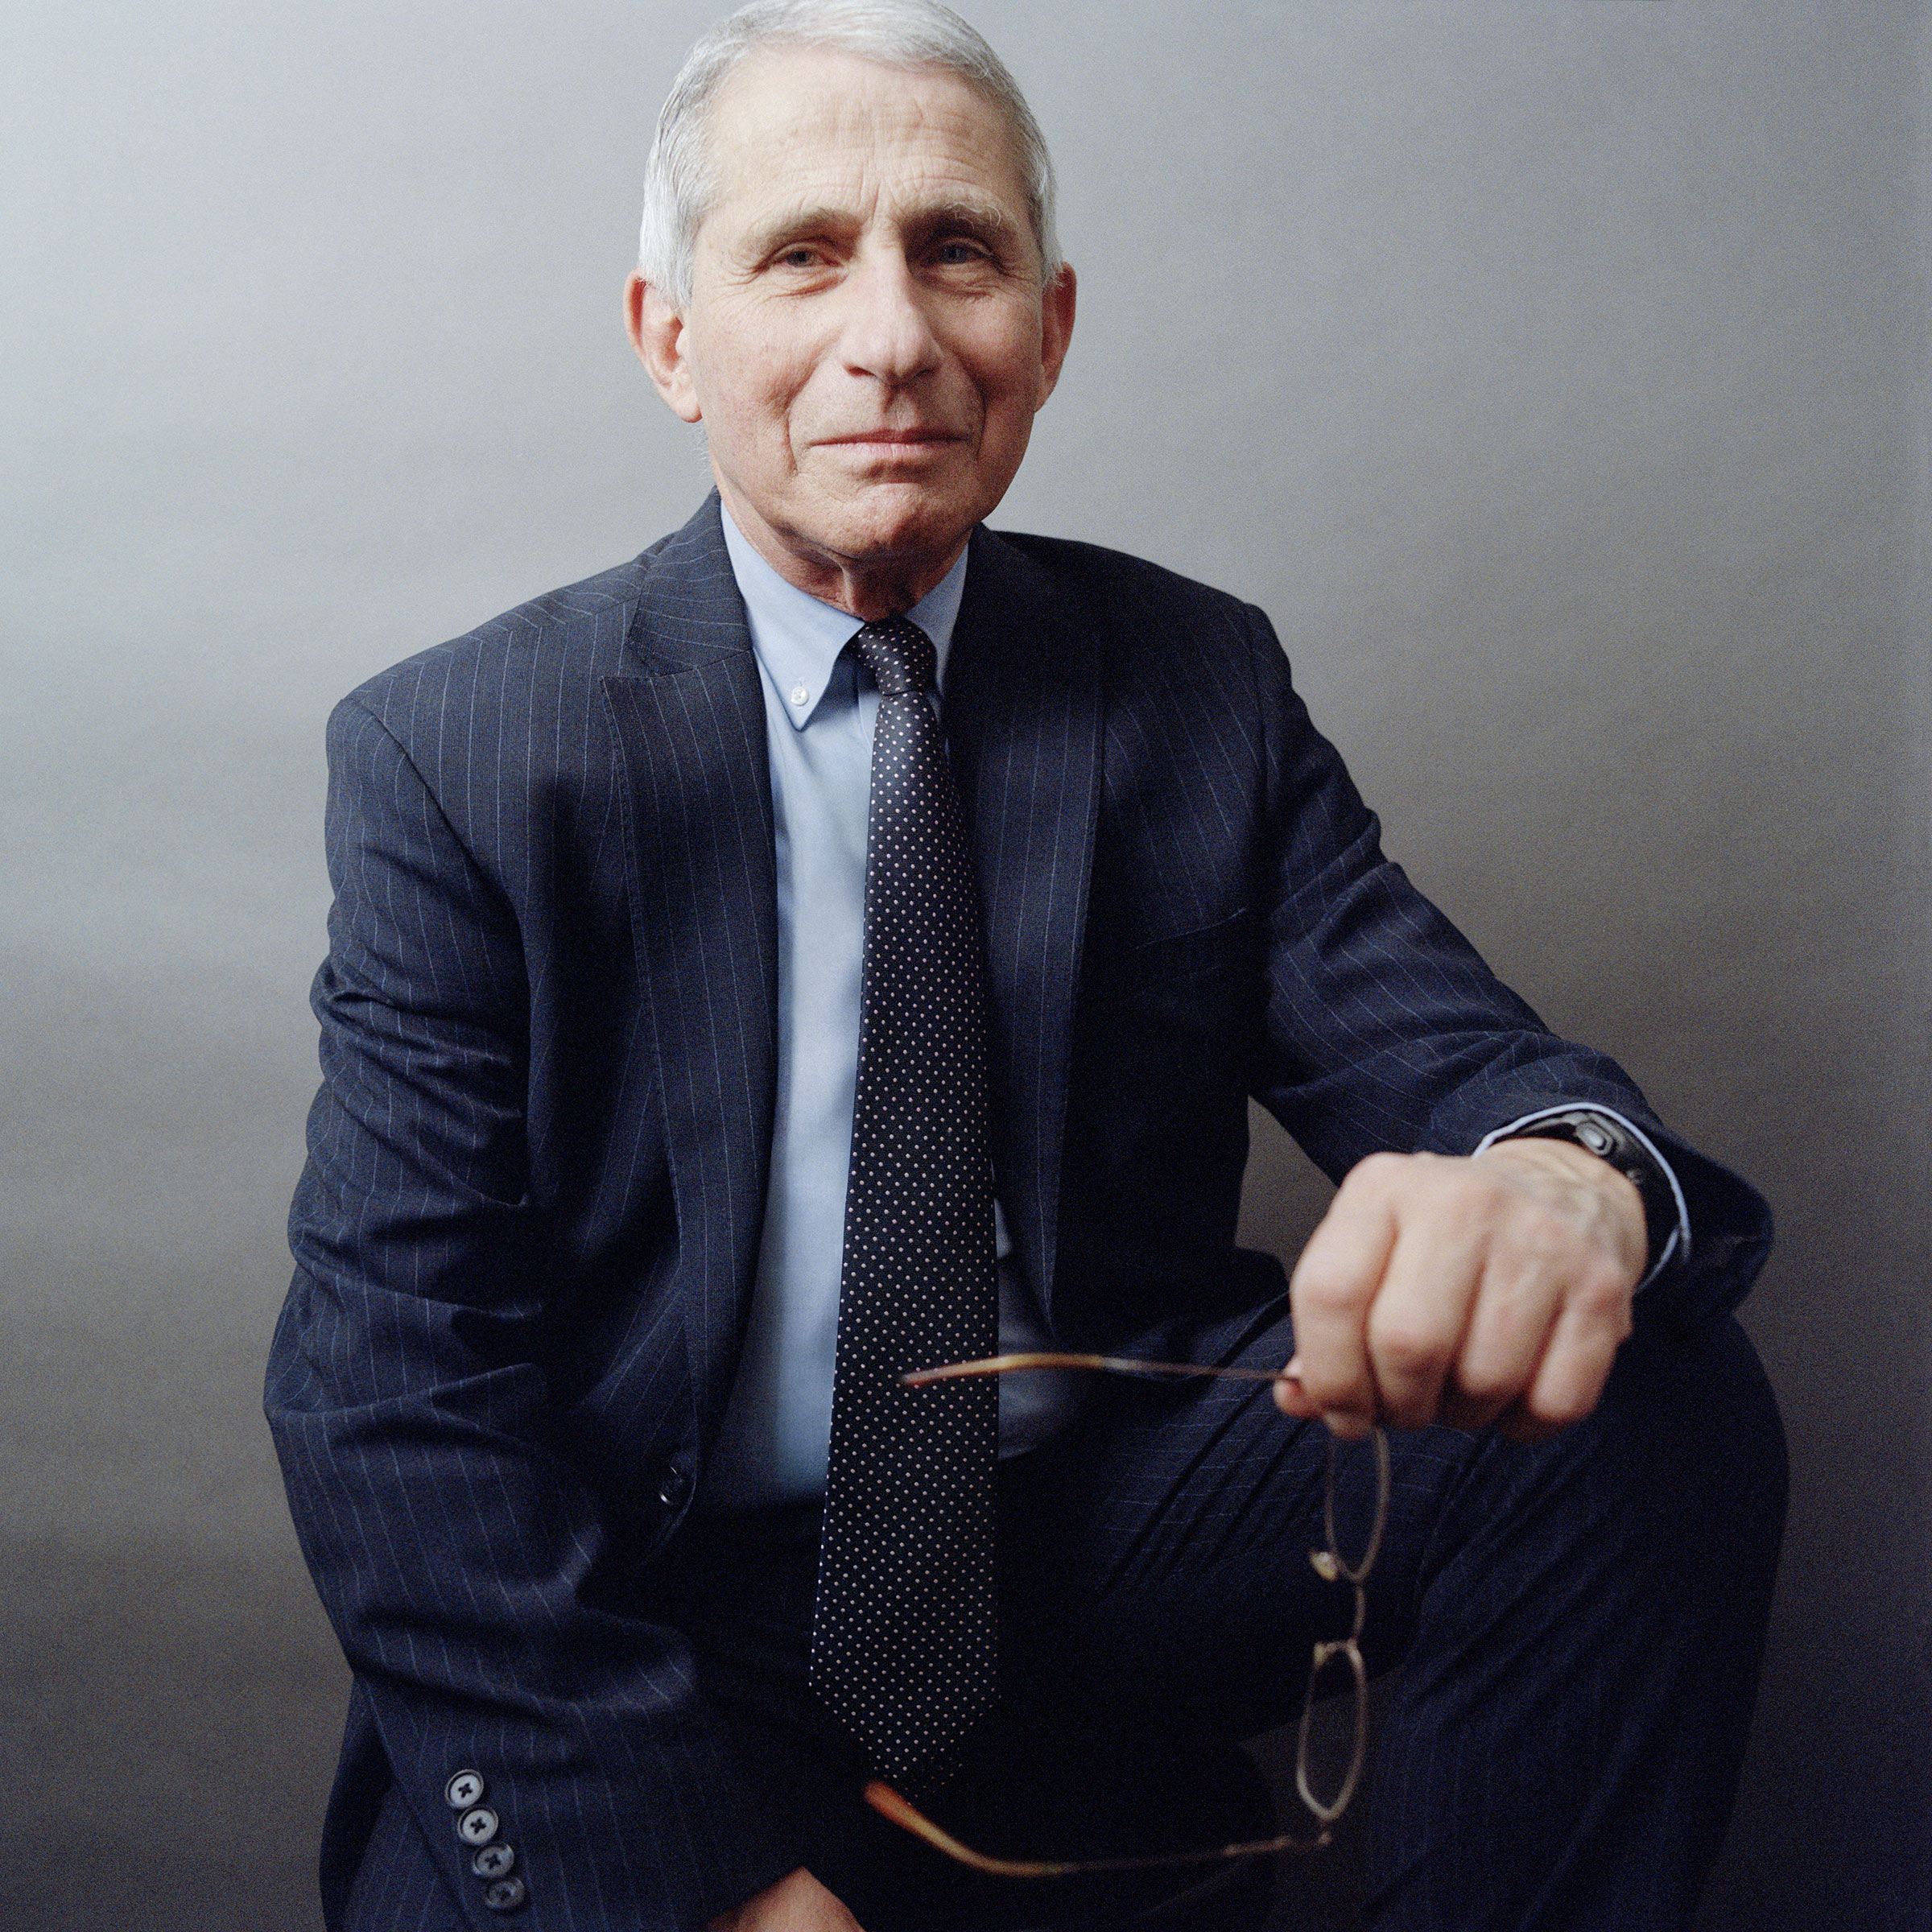 Dr. Anthony Fauci, photographed in Bethesda, Md., on Dec. 4, 2020. (Jody Rogac for TIME)